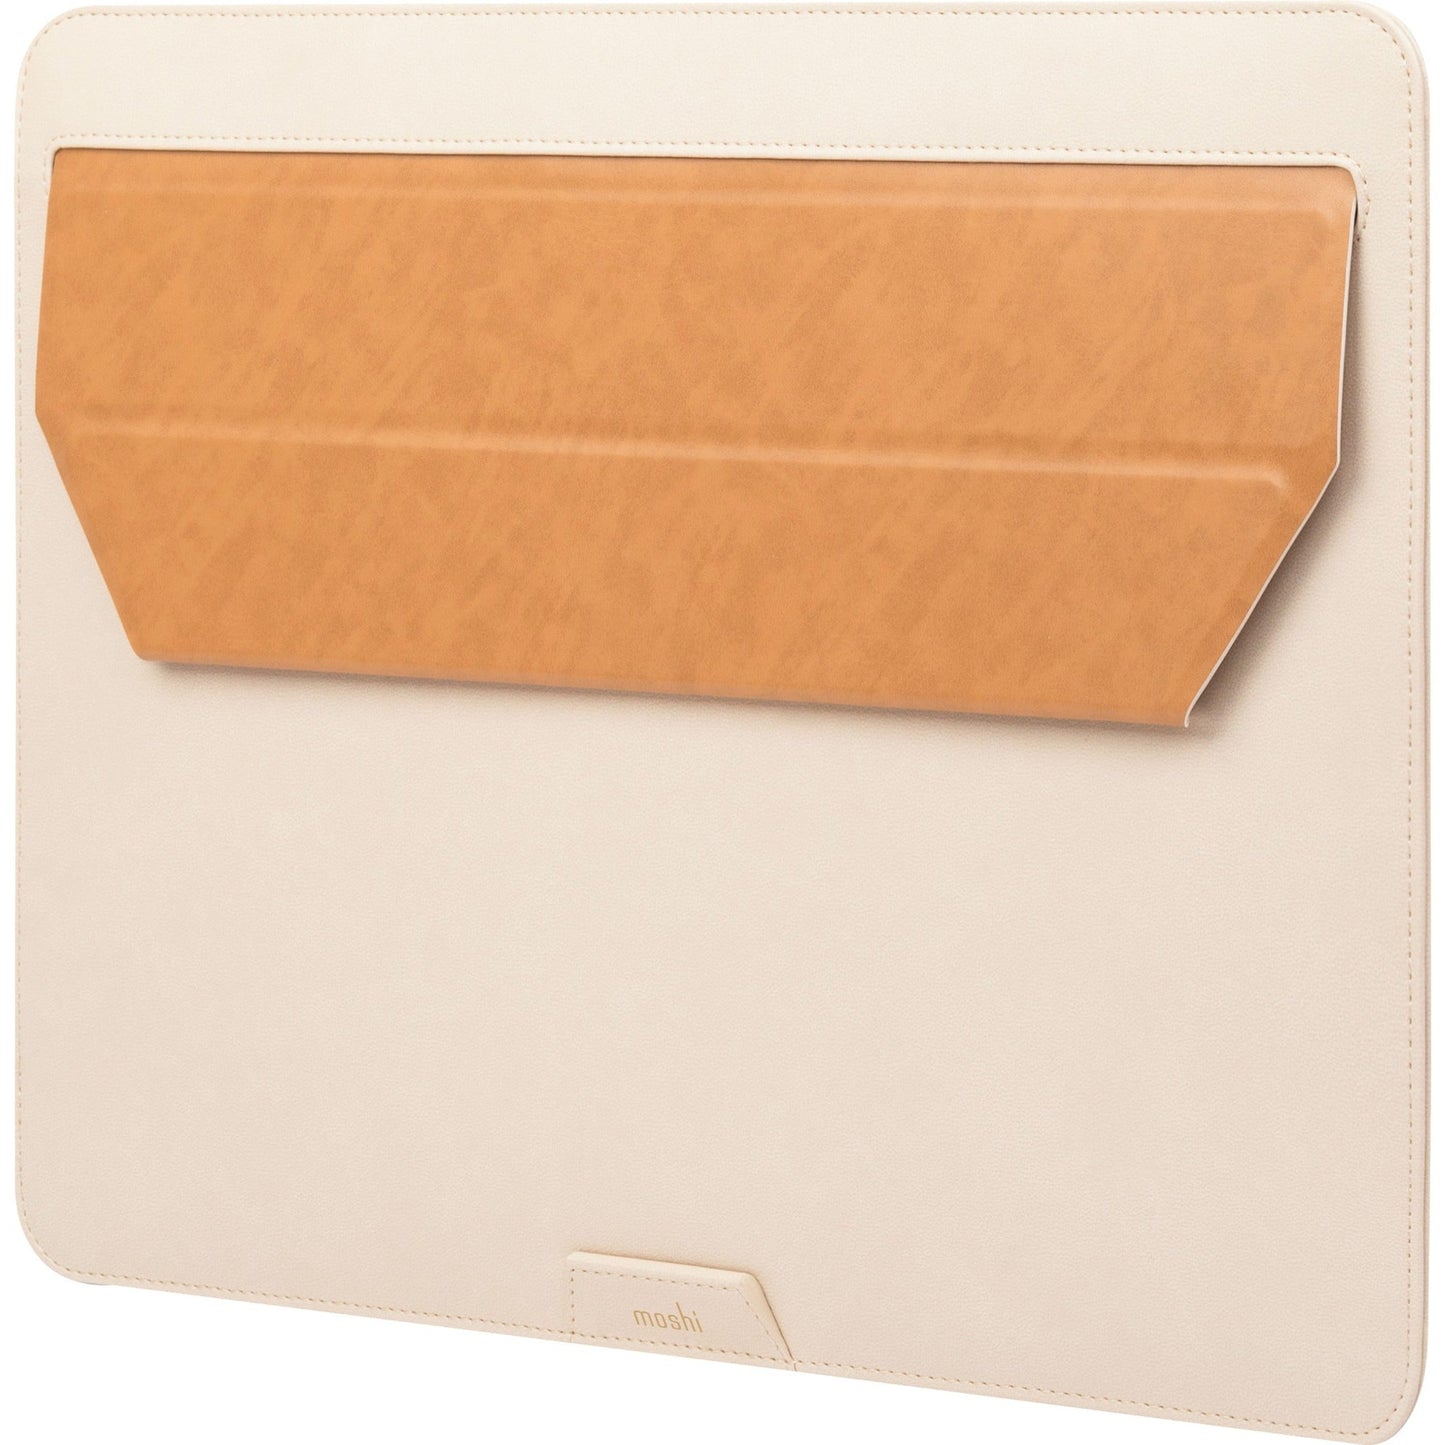 Moshi Muse Carrying Case (Sleeve) for 13" Notebook Cable - Seashell White